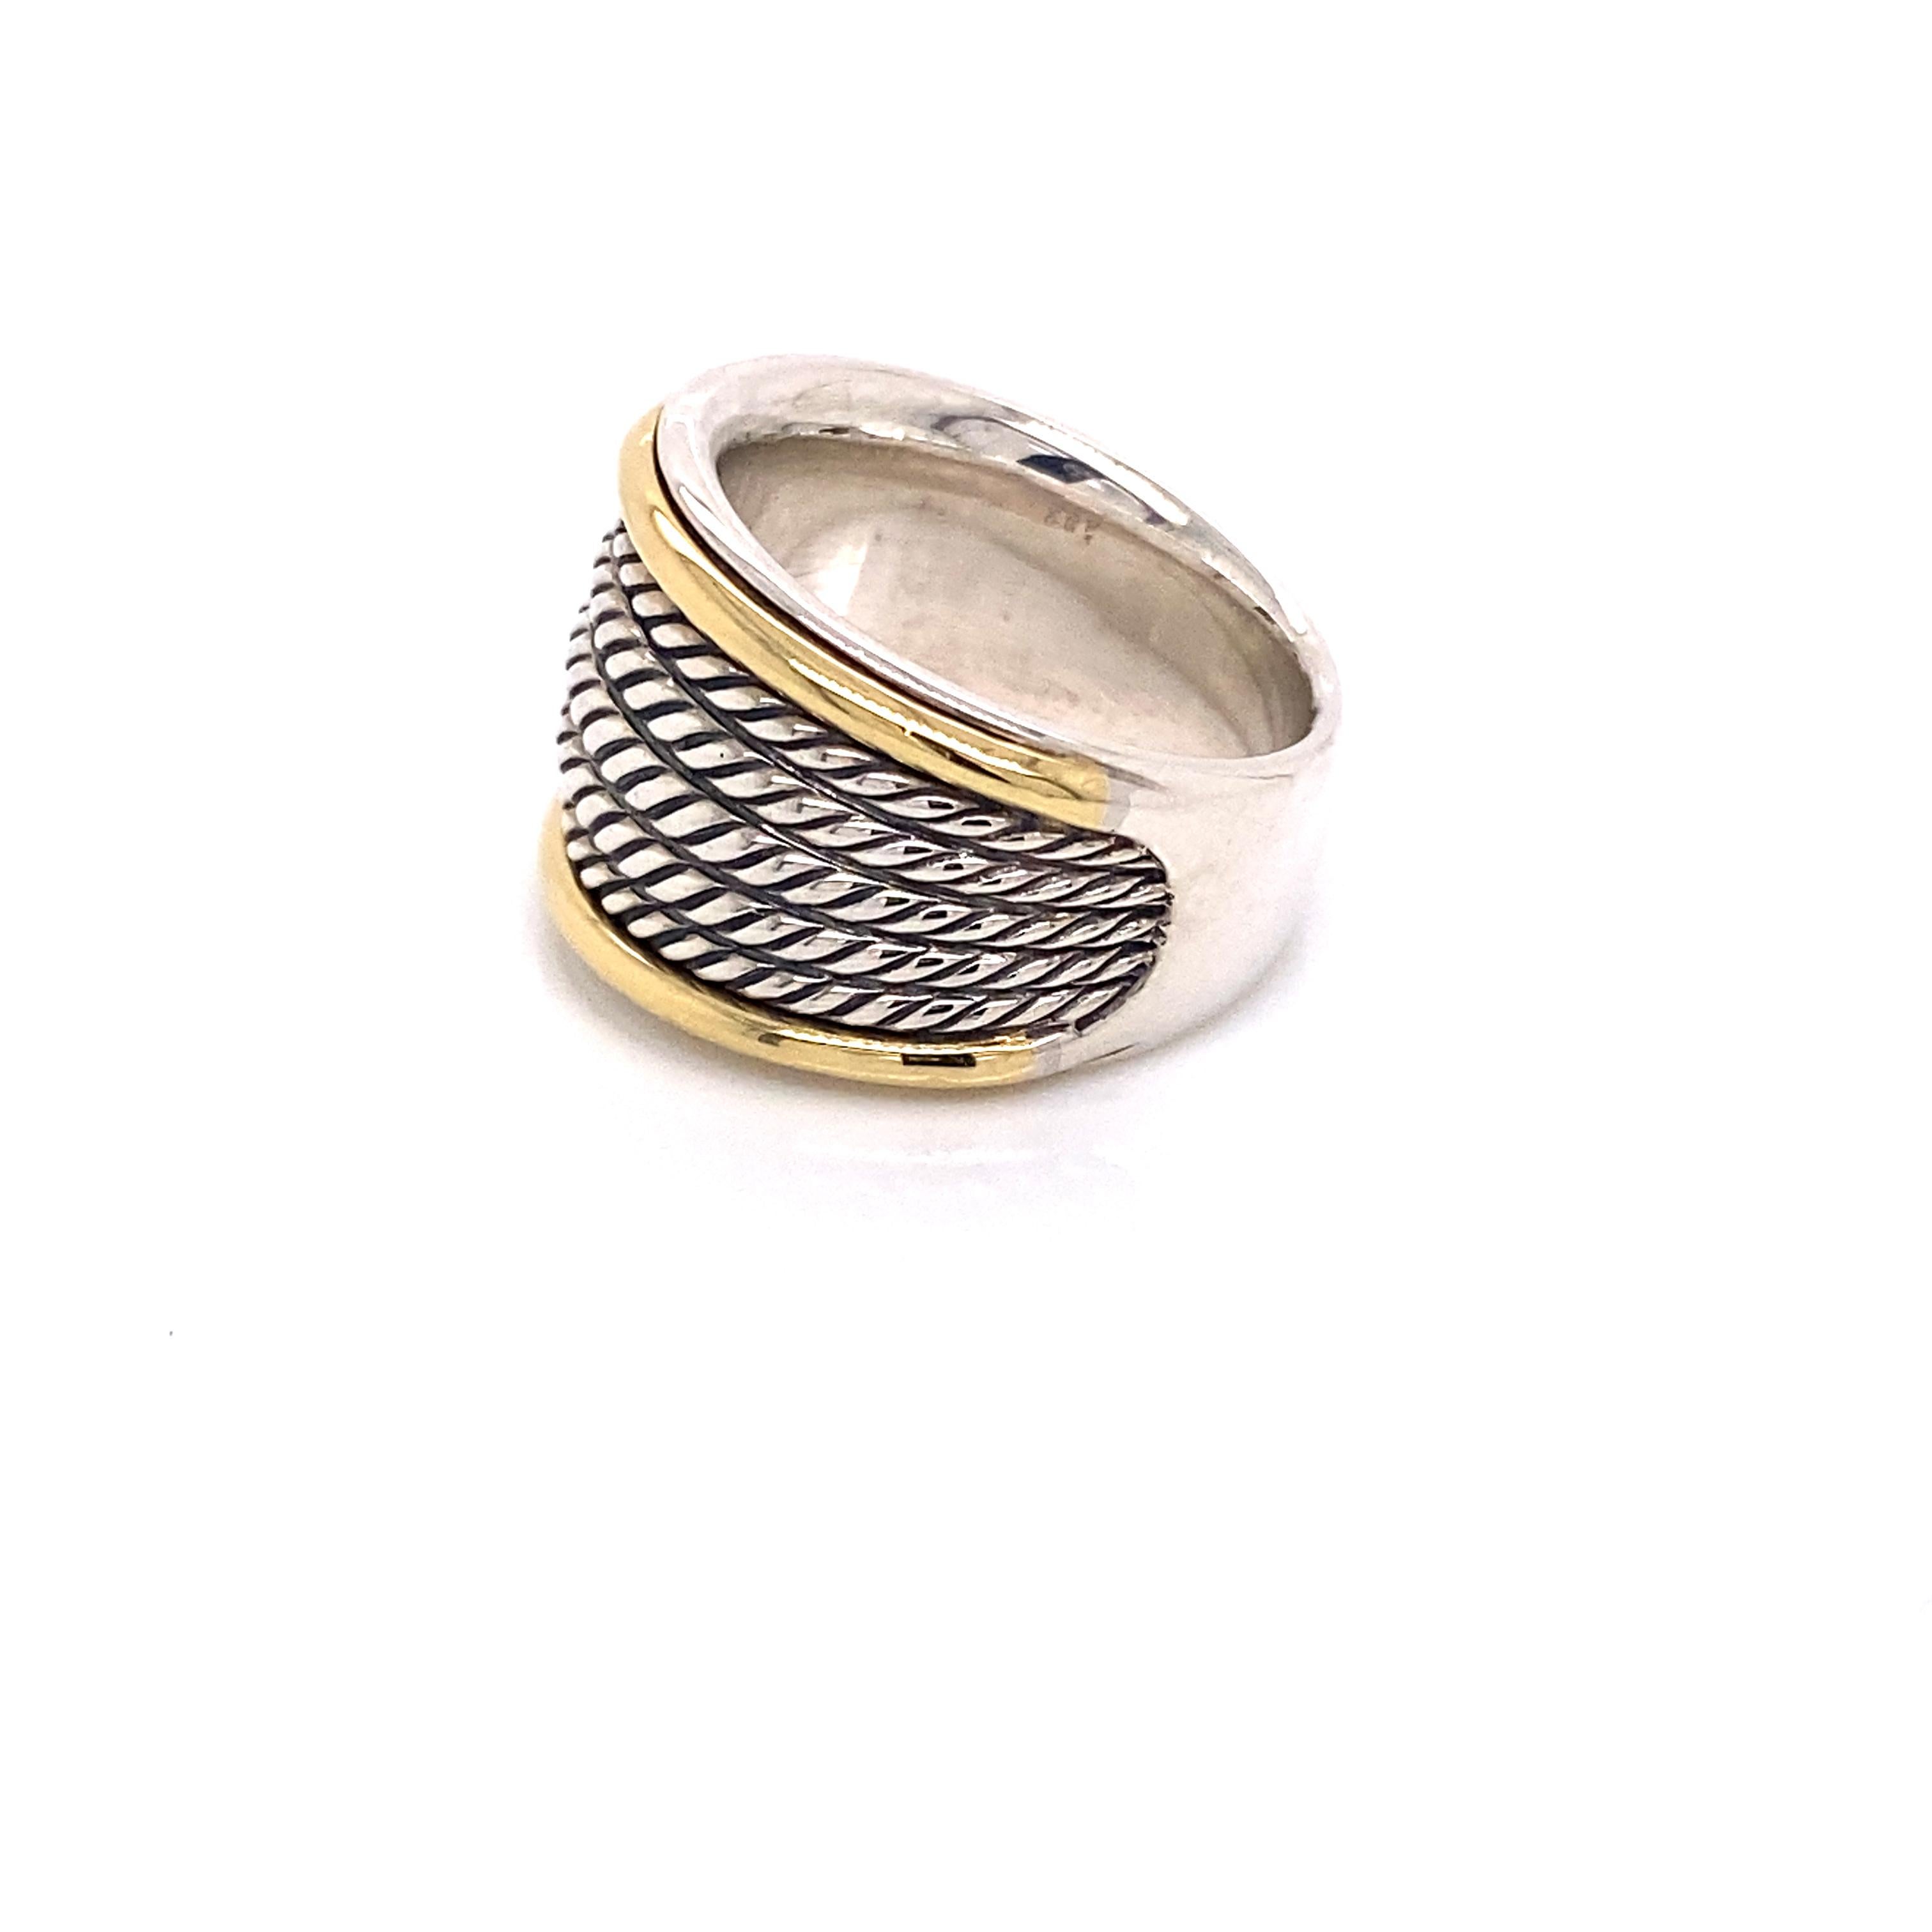 This classic David Yuman ring features sterling silver cable bands that fan out encompassed with 18 karat yellow gold. You will receive compliments everyday you wear this ring. This is a size 7 ring.  